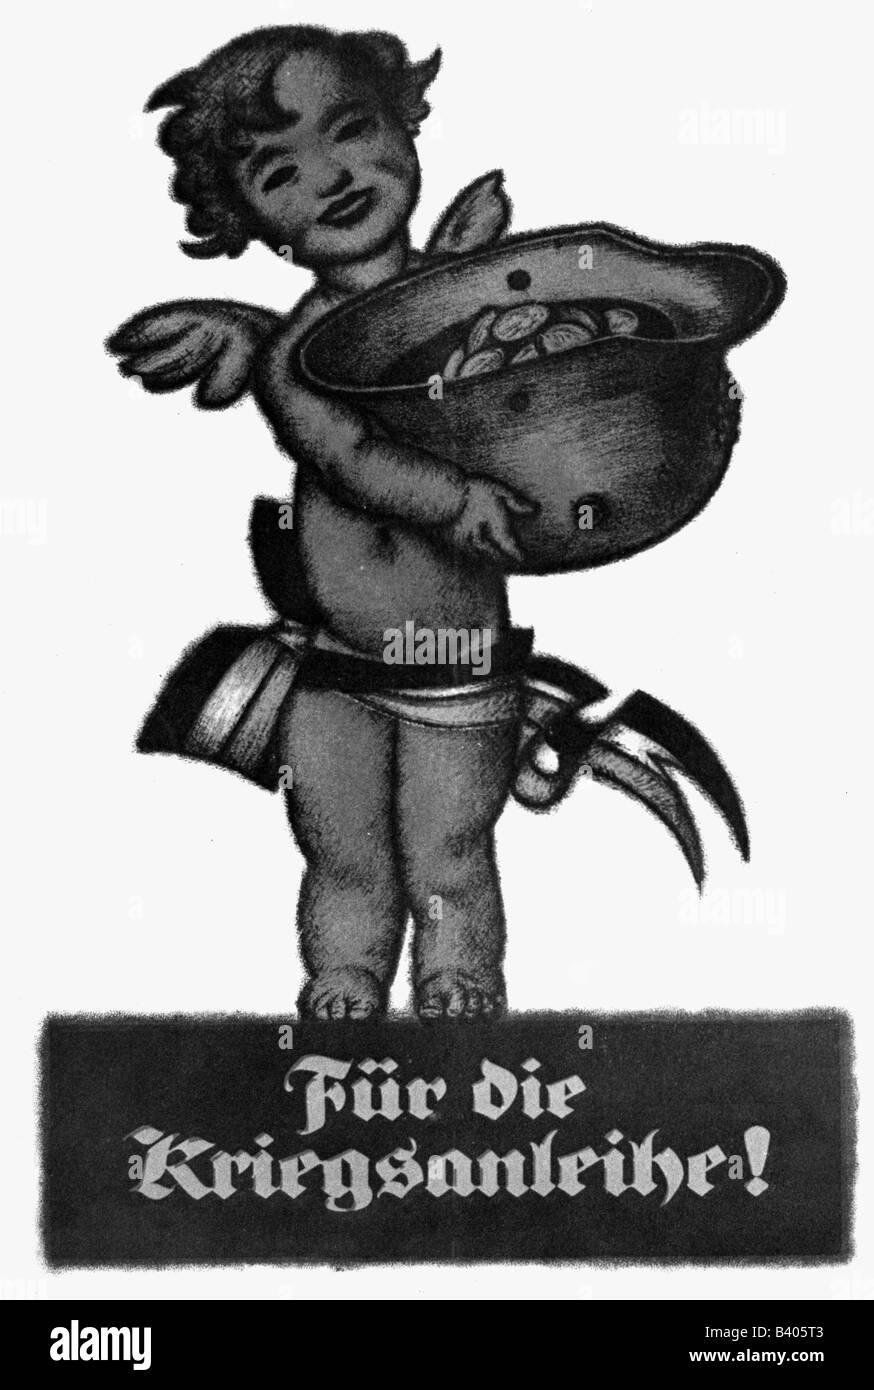 events, First World War / WWI, propaganda, poster 'Fuer die Kriegsanleihe!' (For the war bond!), drawing, by Paul Plontke (1884 - 1966), Germany, circa 1917, Stock Photo